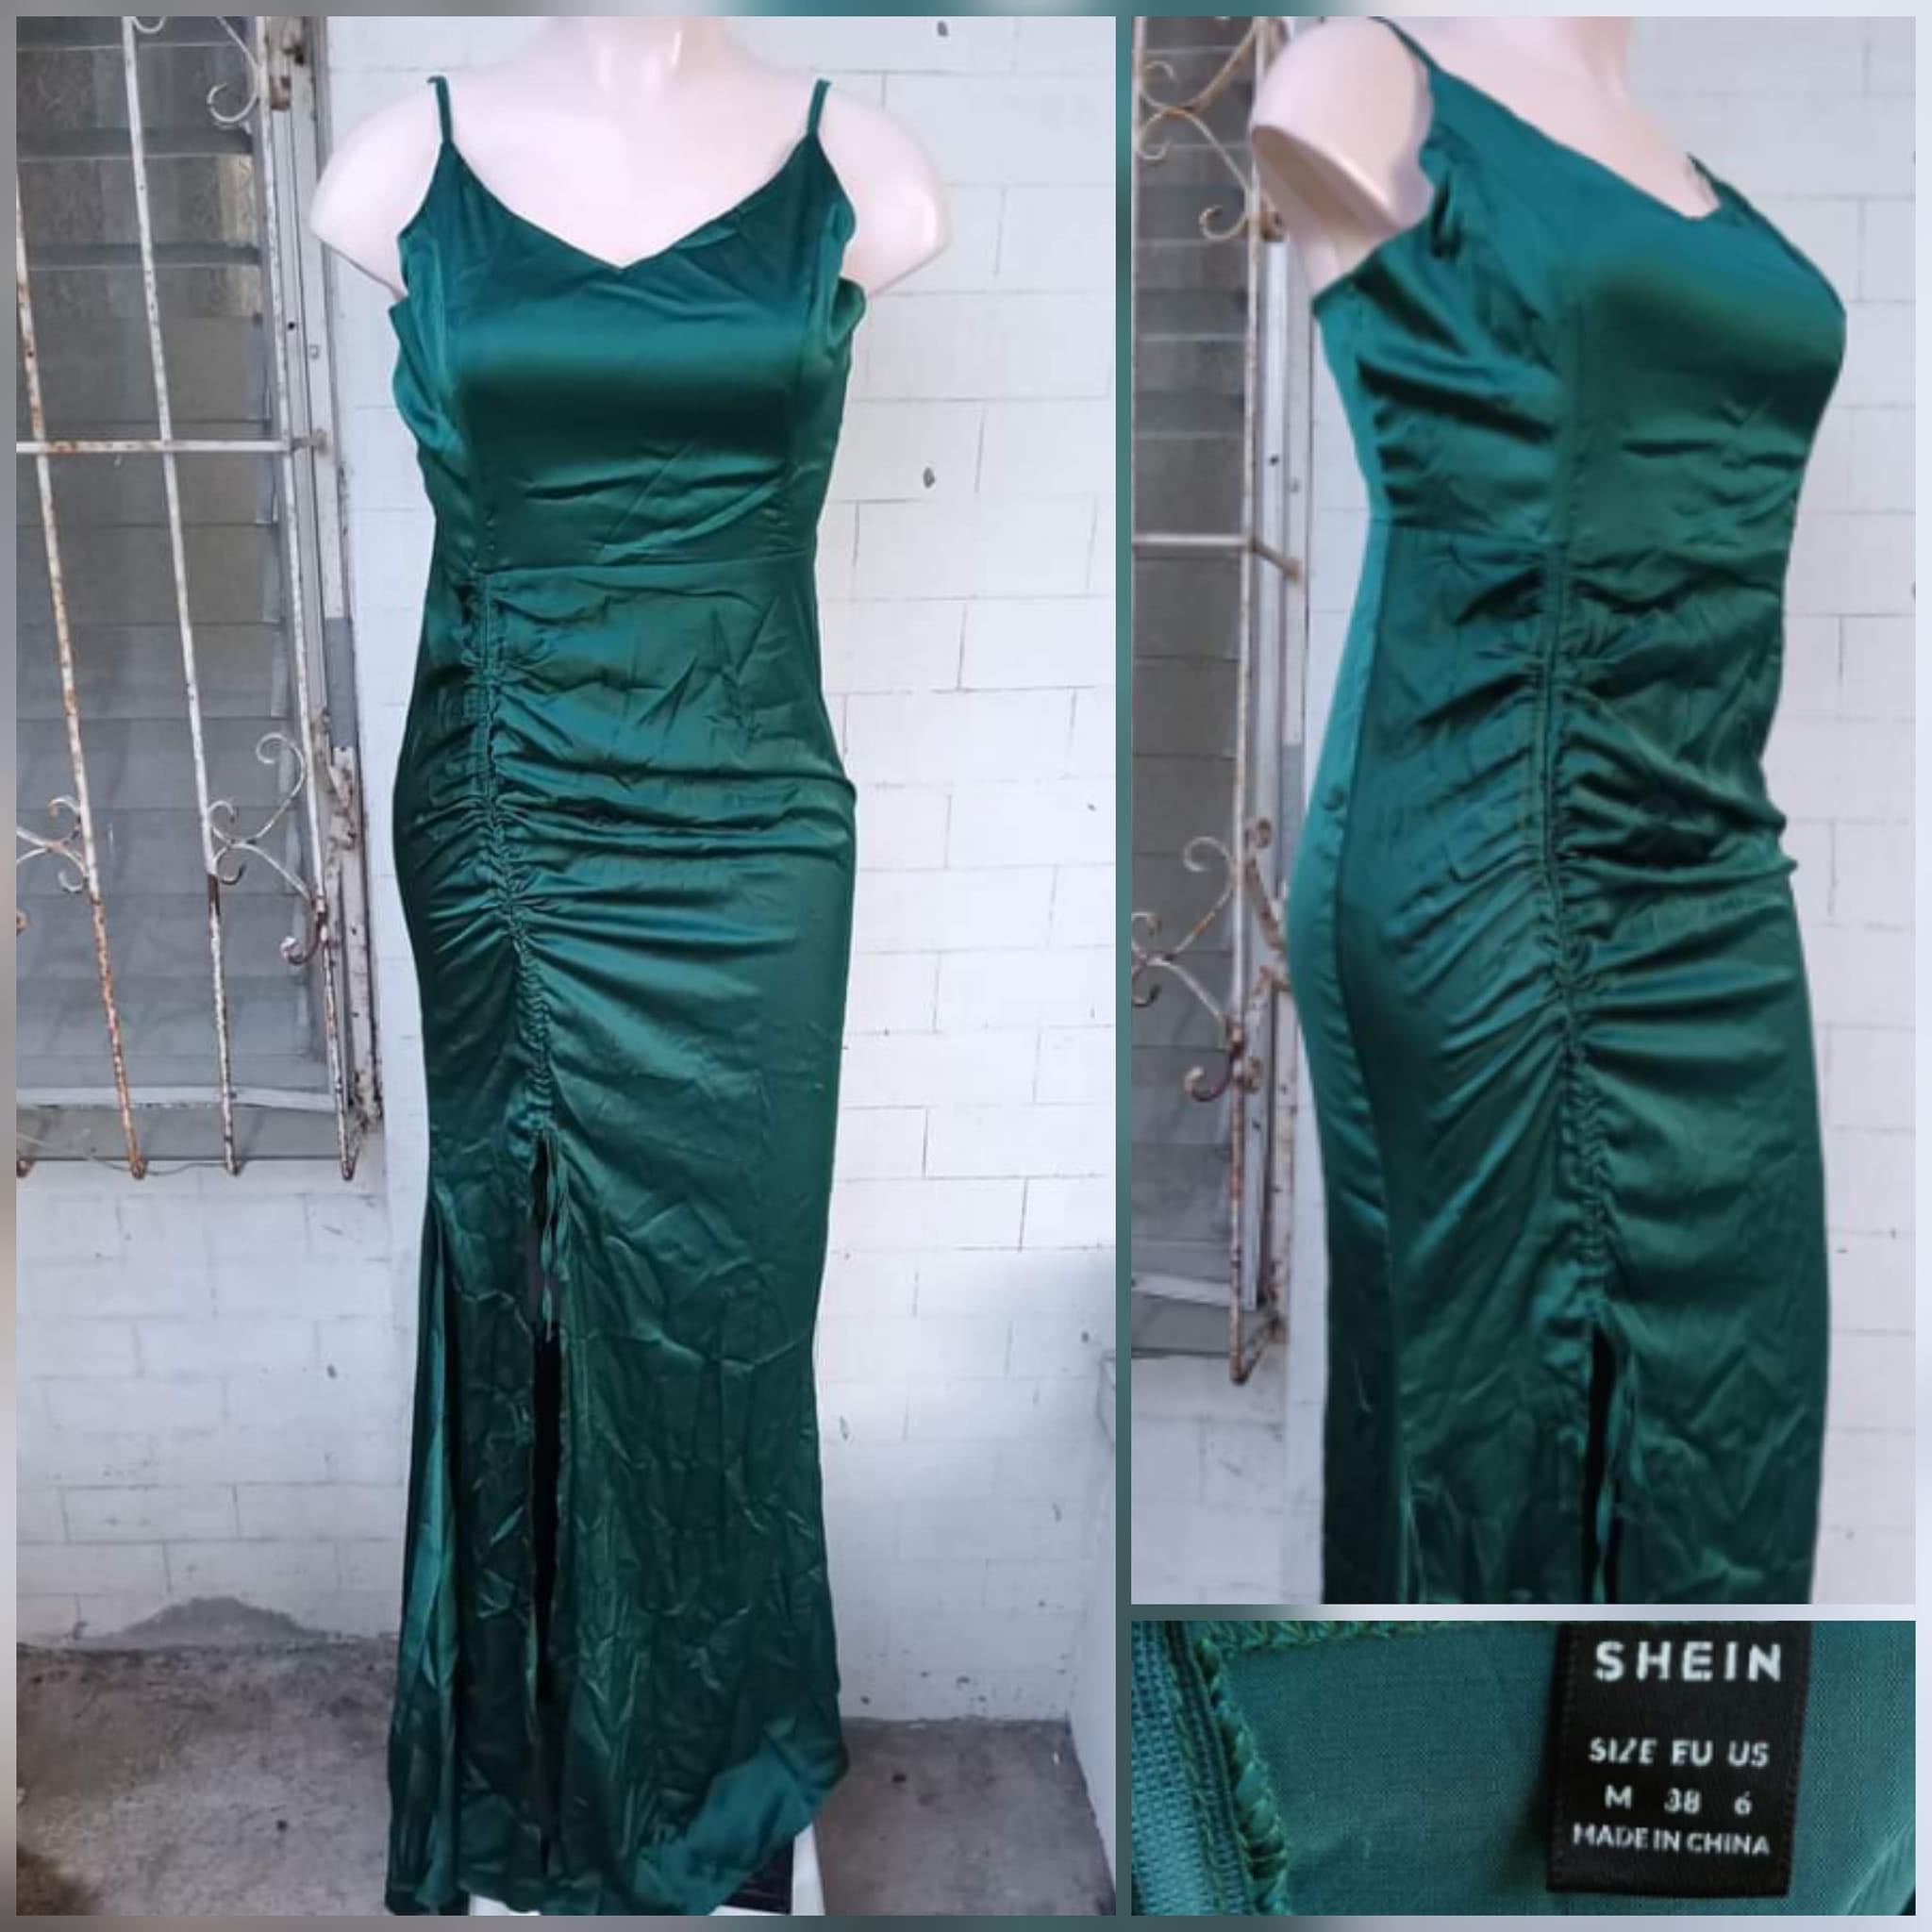 Shein Emerald Green Gown/Dress on Carousell